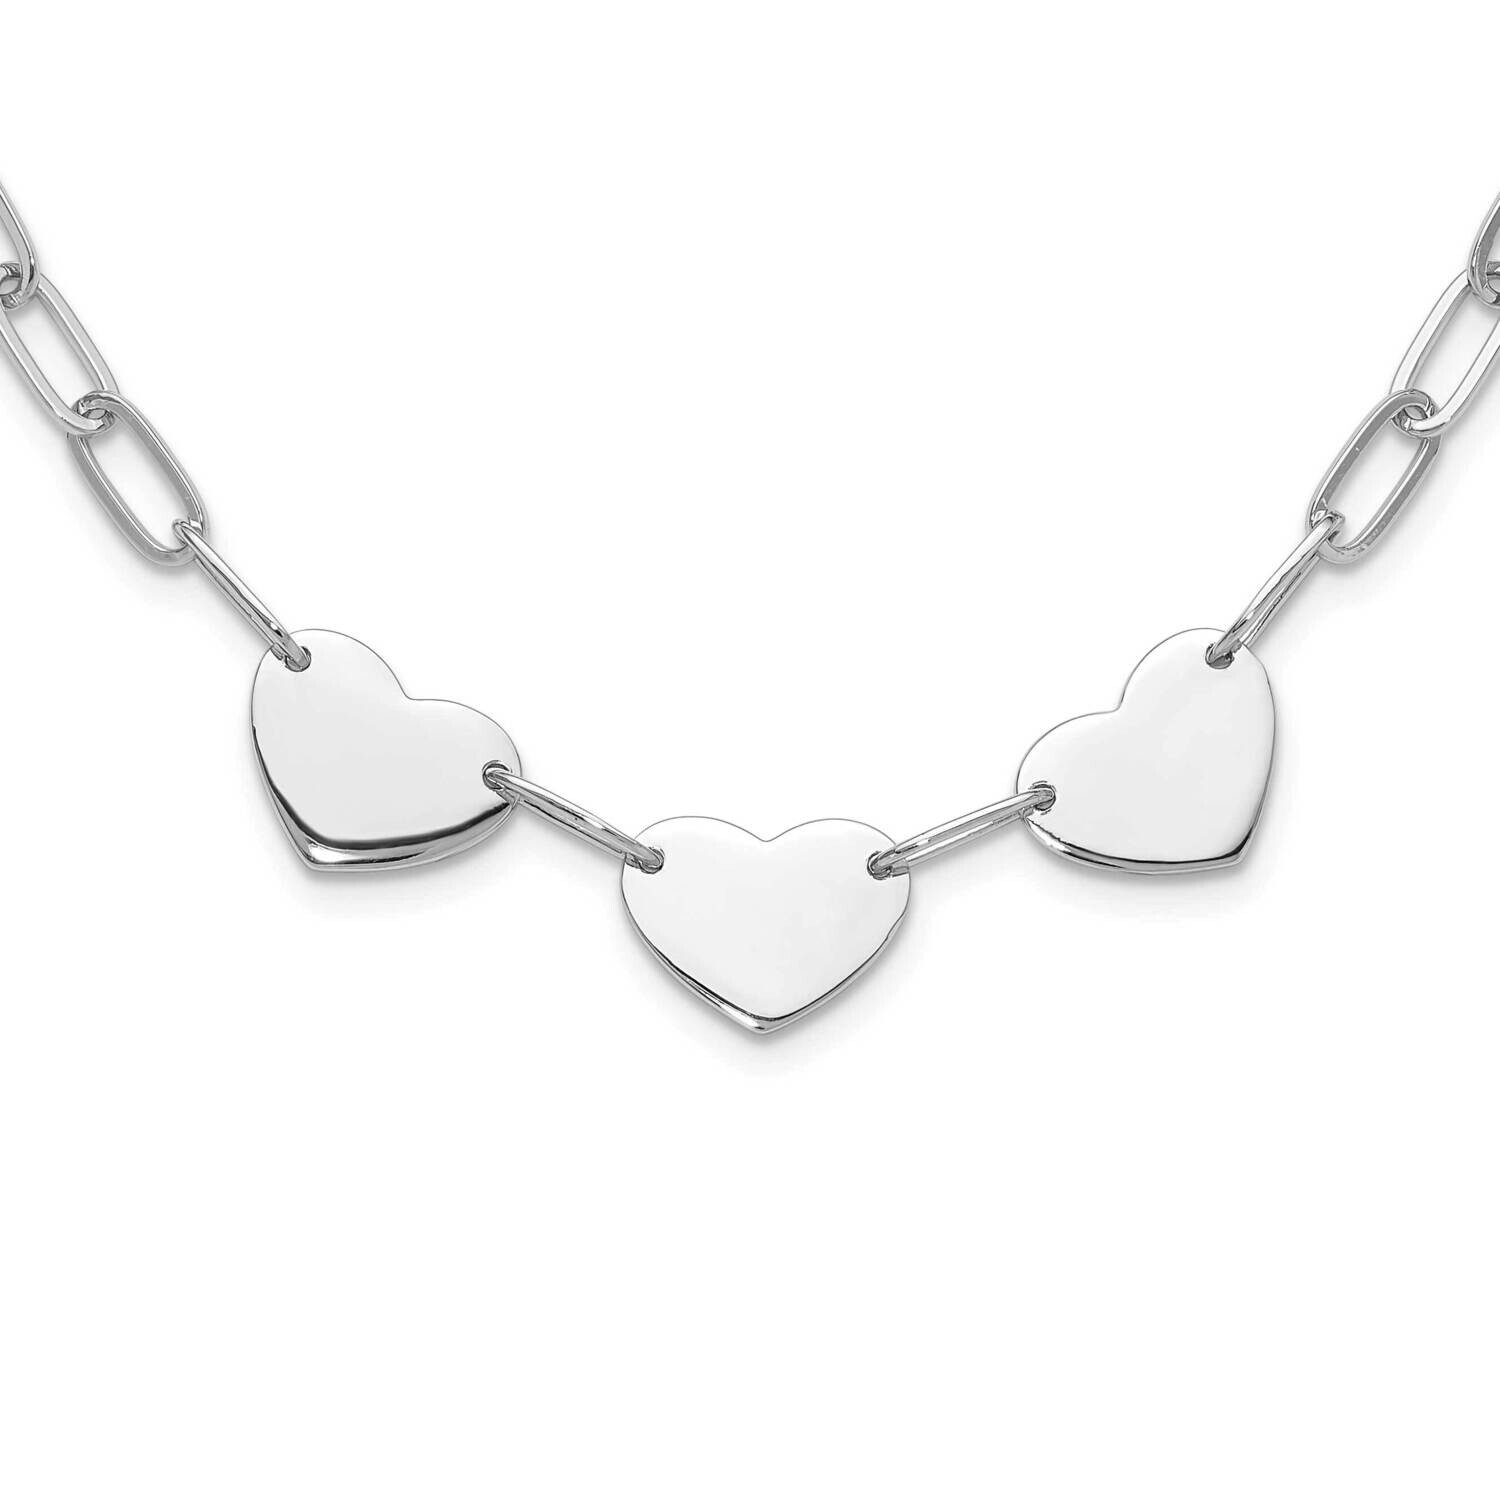 Triple Heart Paperclip Link 17.5 Inch Necklace Sterling Silver Rhodium-Plated QG6550-17.5